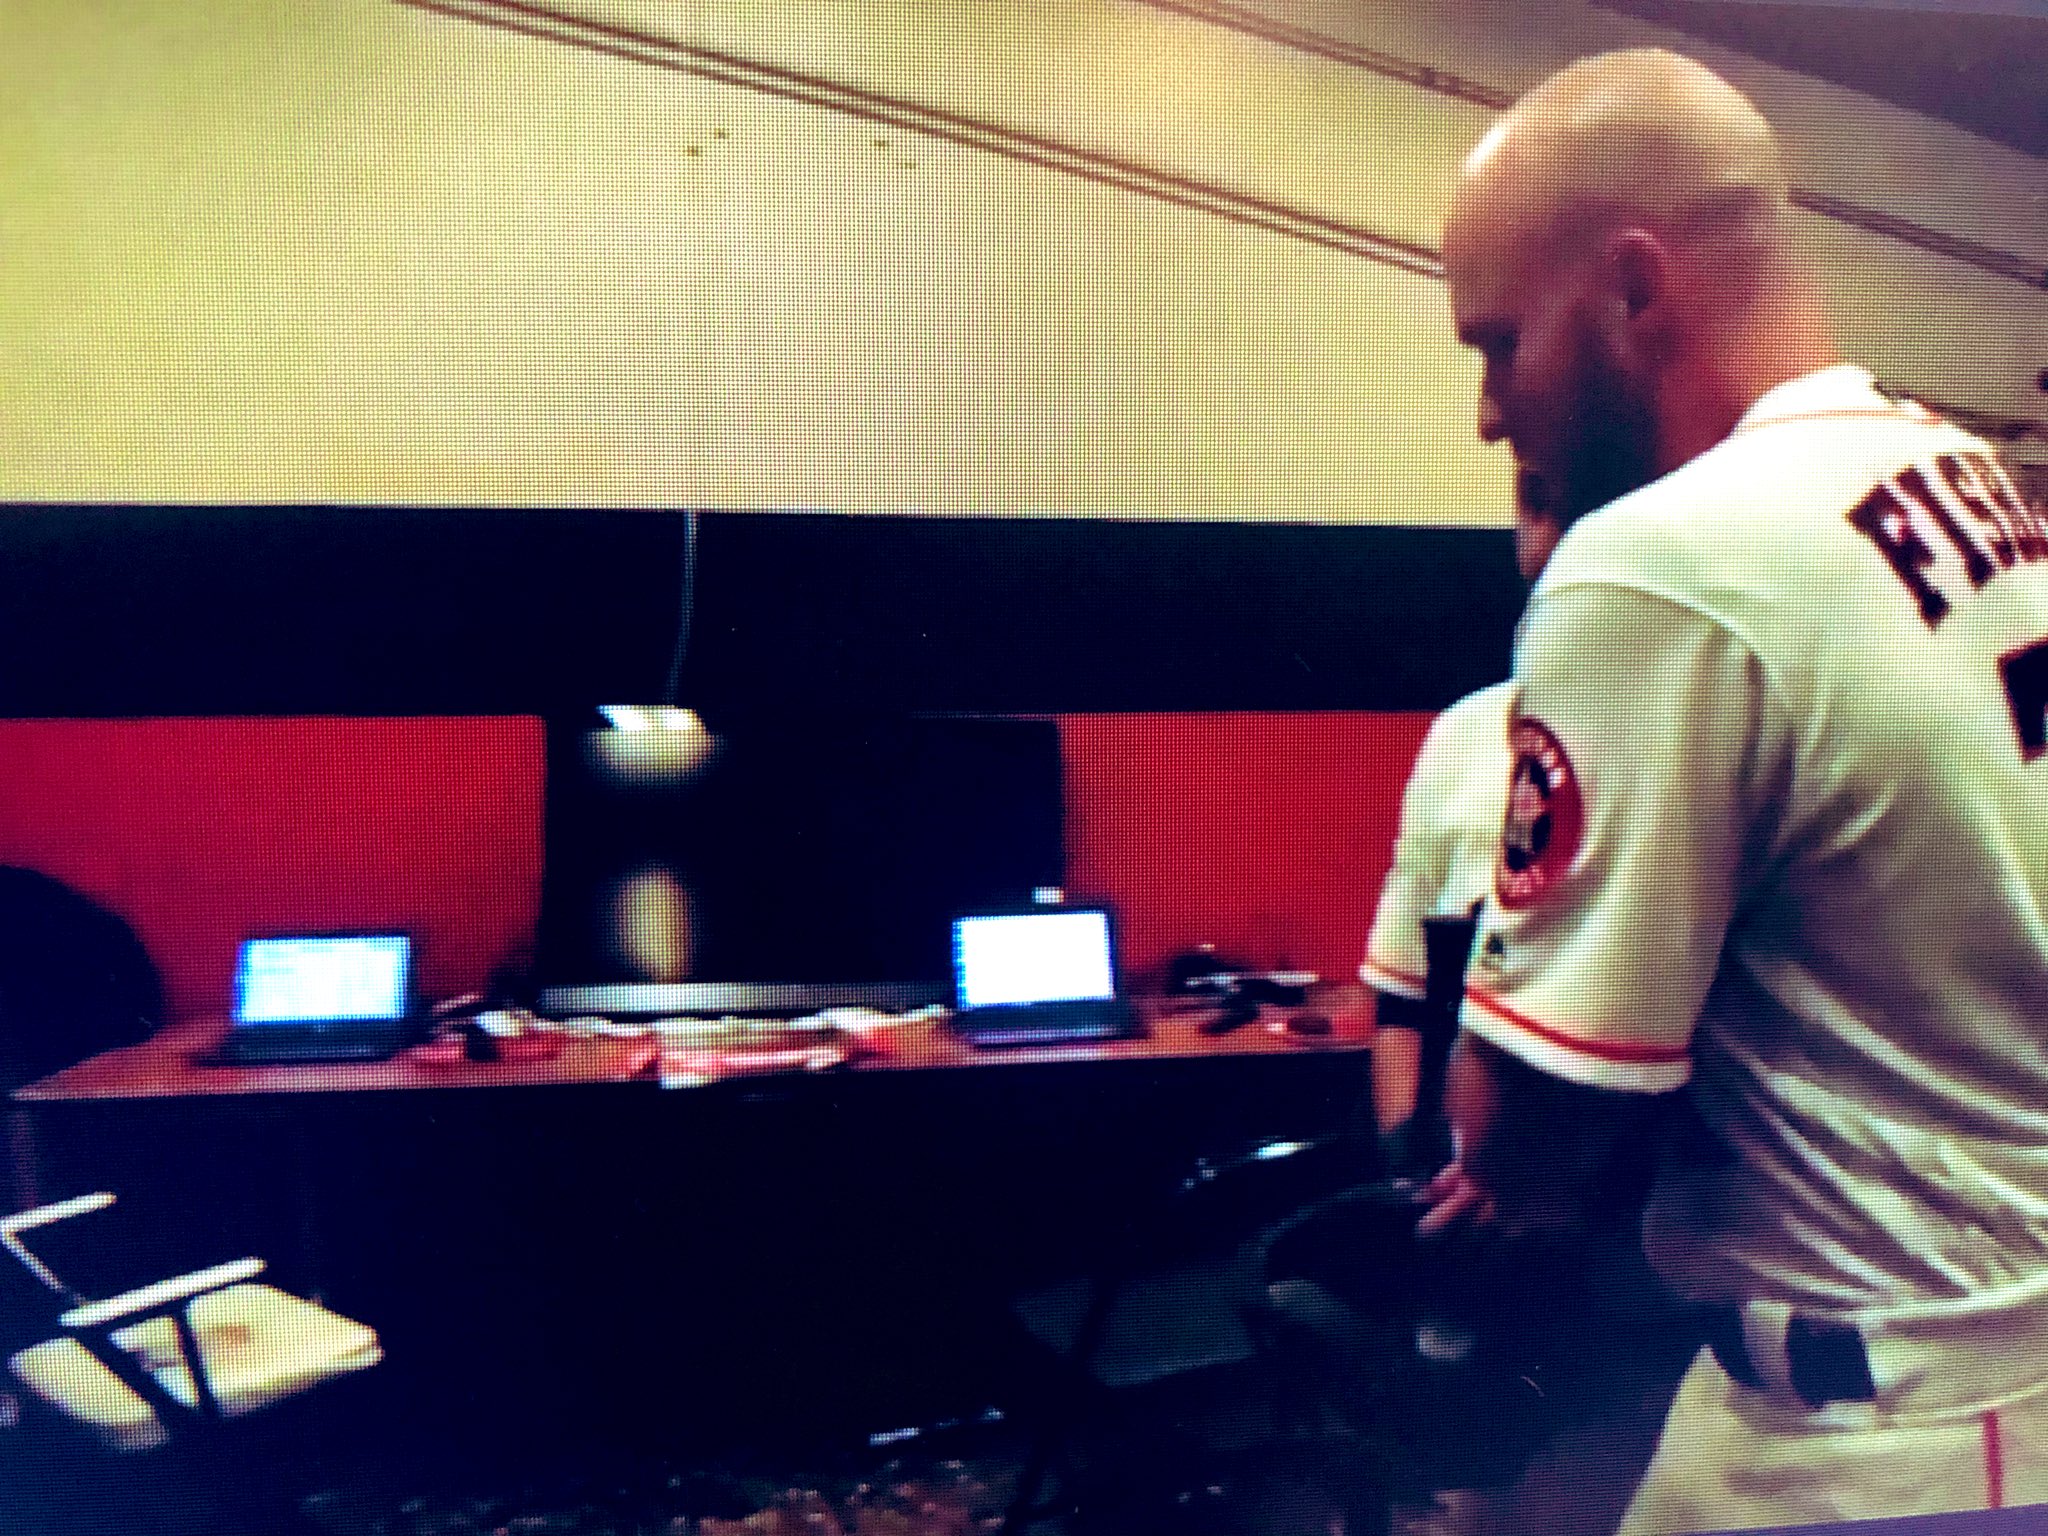 Look: Here is the Astros' alleged cheating setup with trash can, monitor